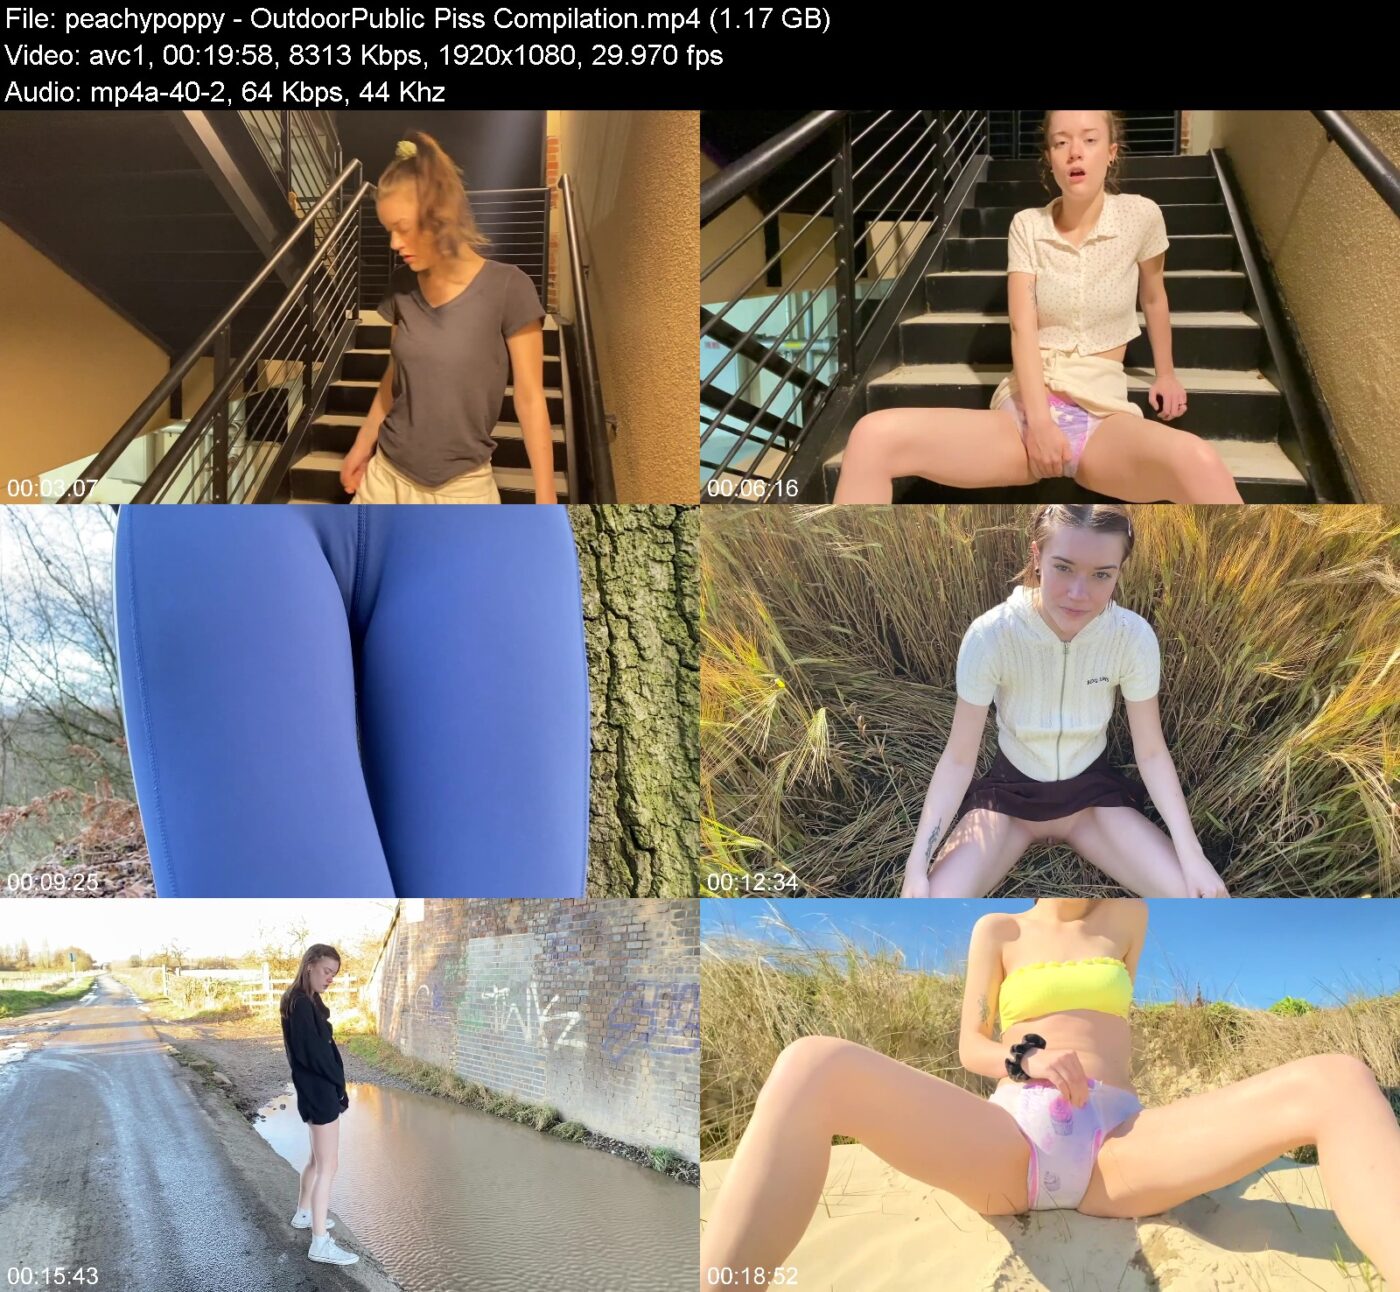 Actress: peachypoppy. Title and Studio: OutdoorPublic Piss Compilation